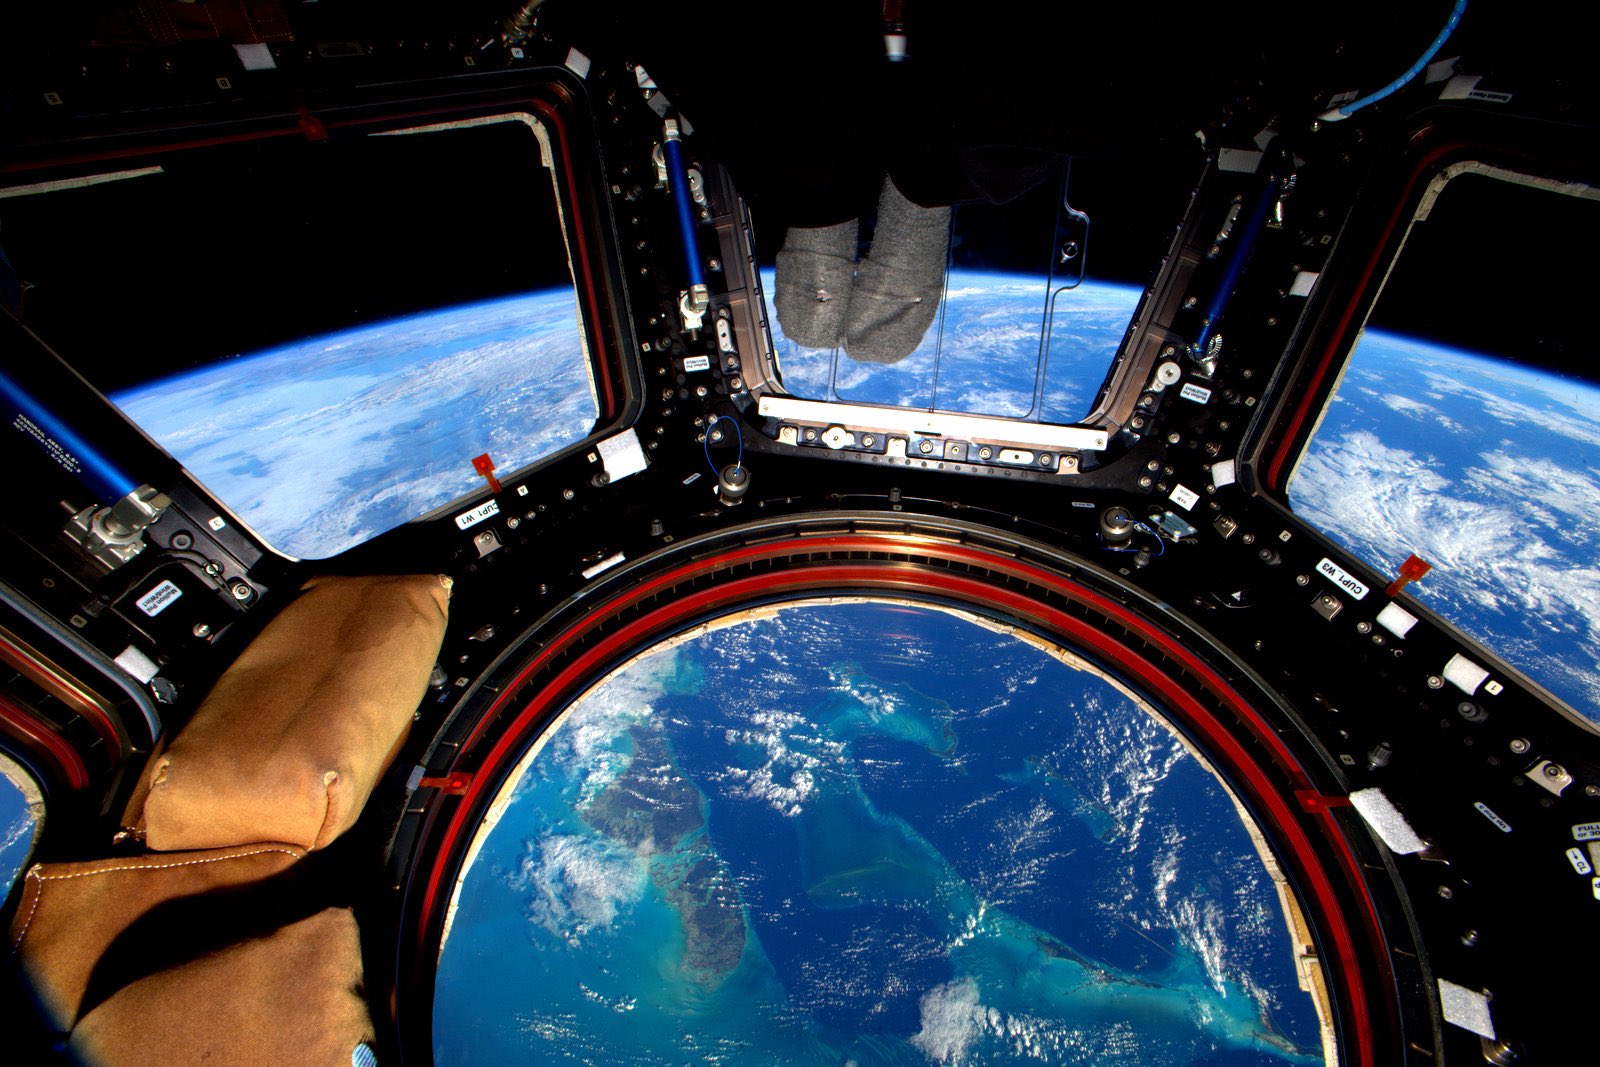 ISS Cupola - View of Earth from space in the ISS module Cupola